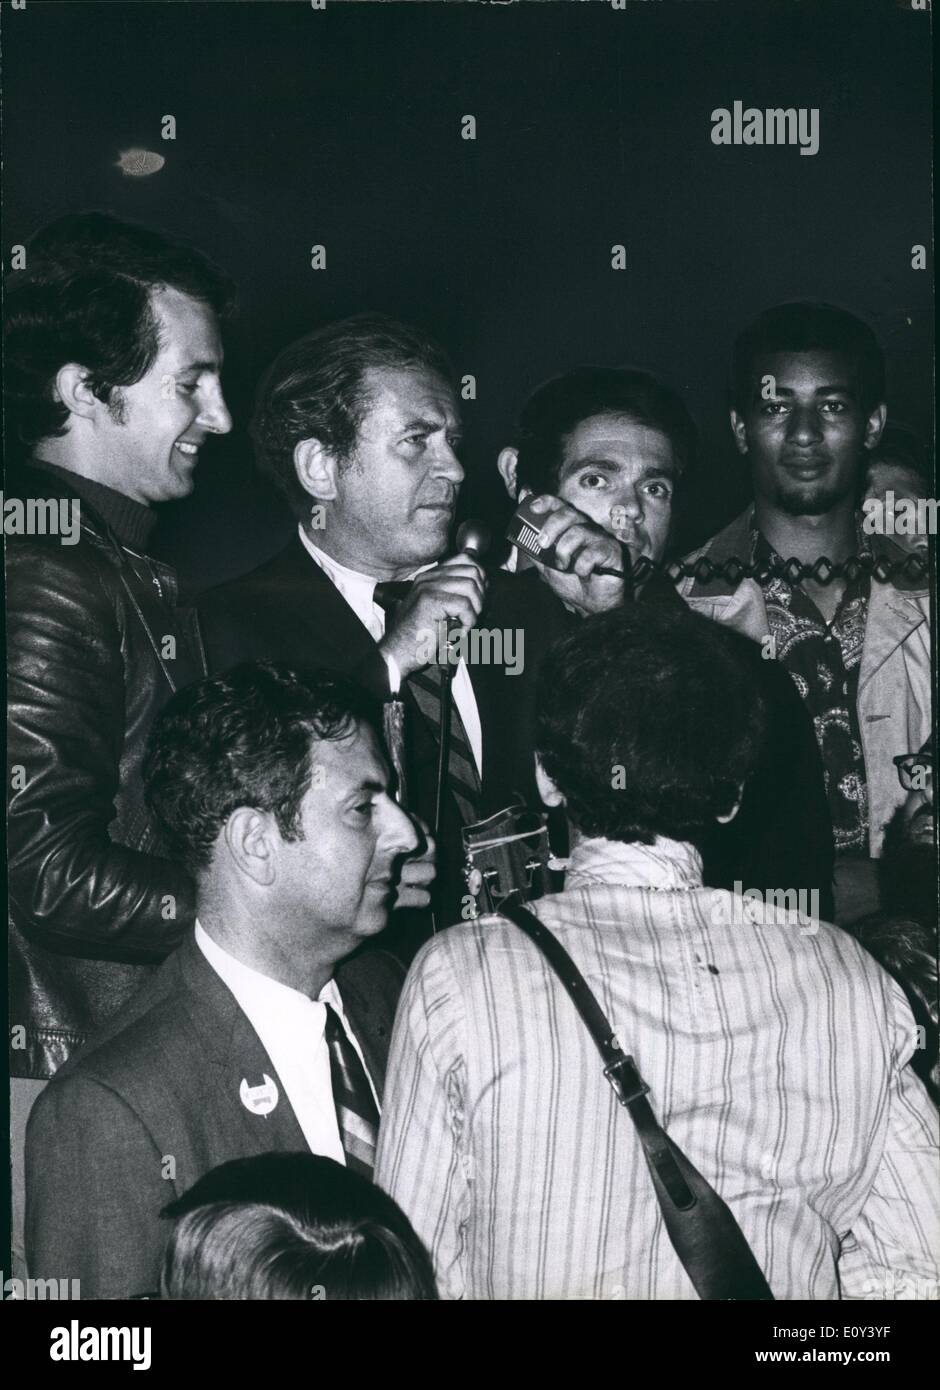 Oct. 10, 1968 - Norman Mailer: At the Democratic convention Chicago, August 1968. Norman Mailer and student leaders, in Grant part, during the Democratic Convention in Chicago. Stock Photo